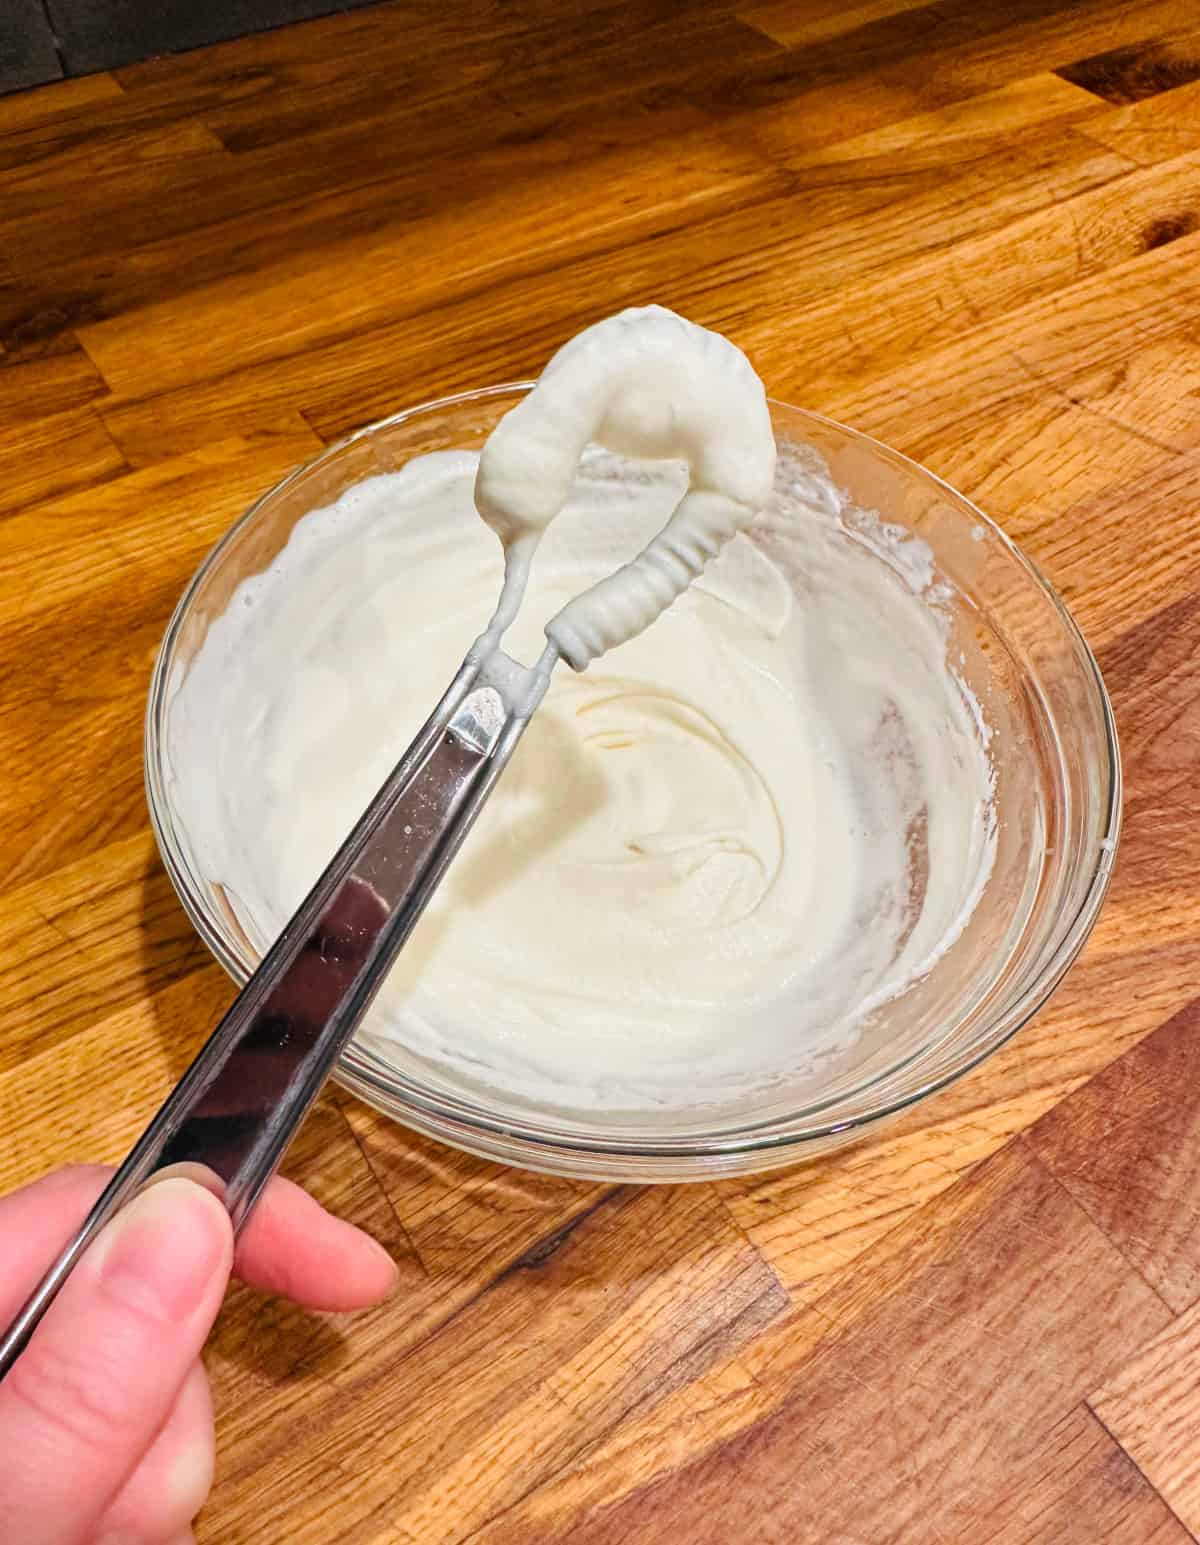 A hand holding a magic whisk over a small glass bowl of whipped cream.